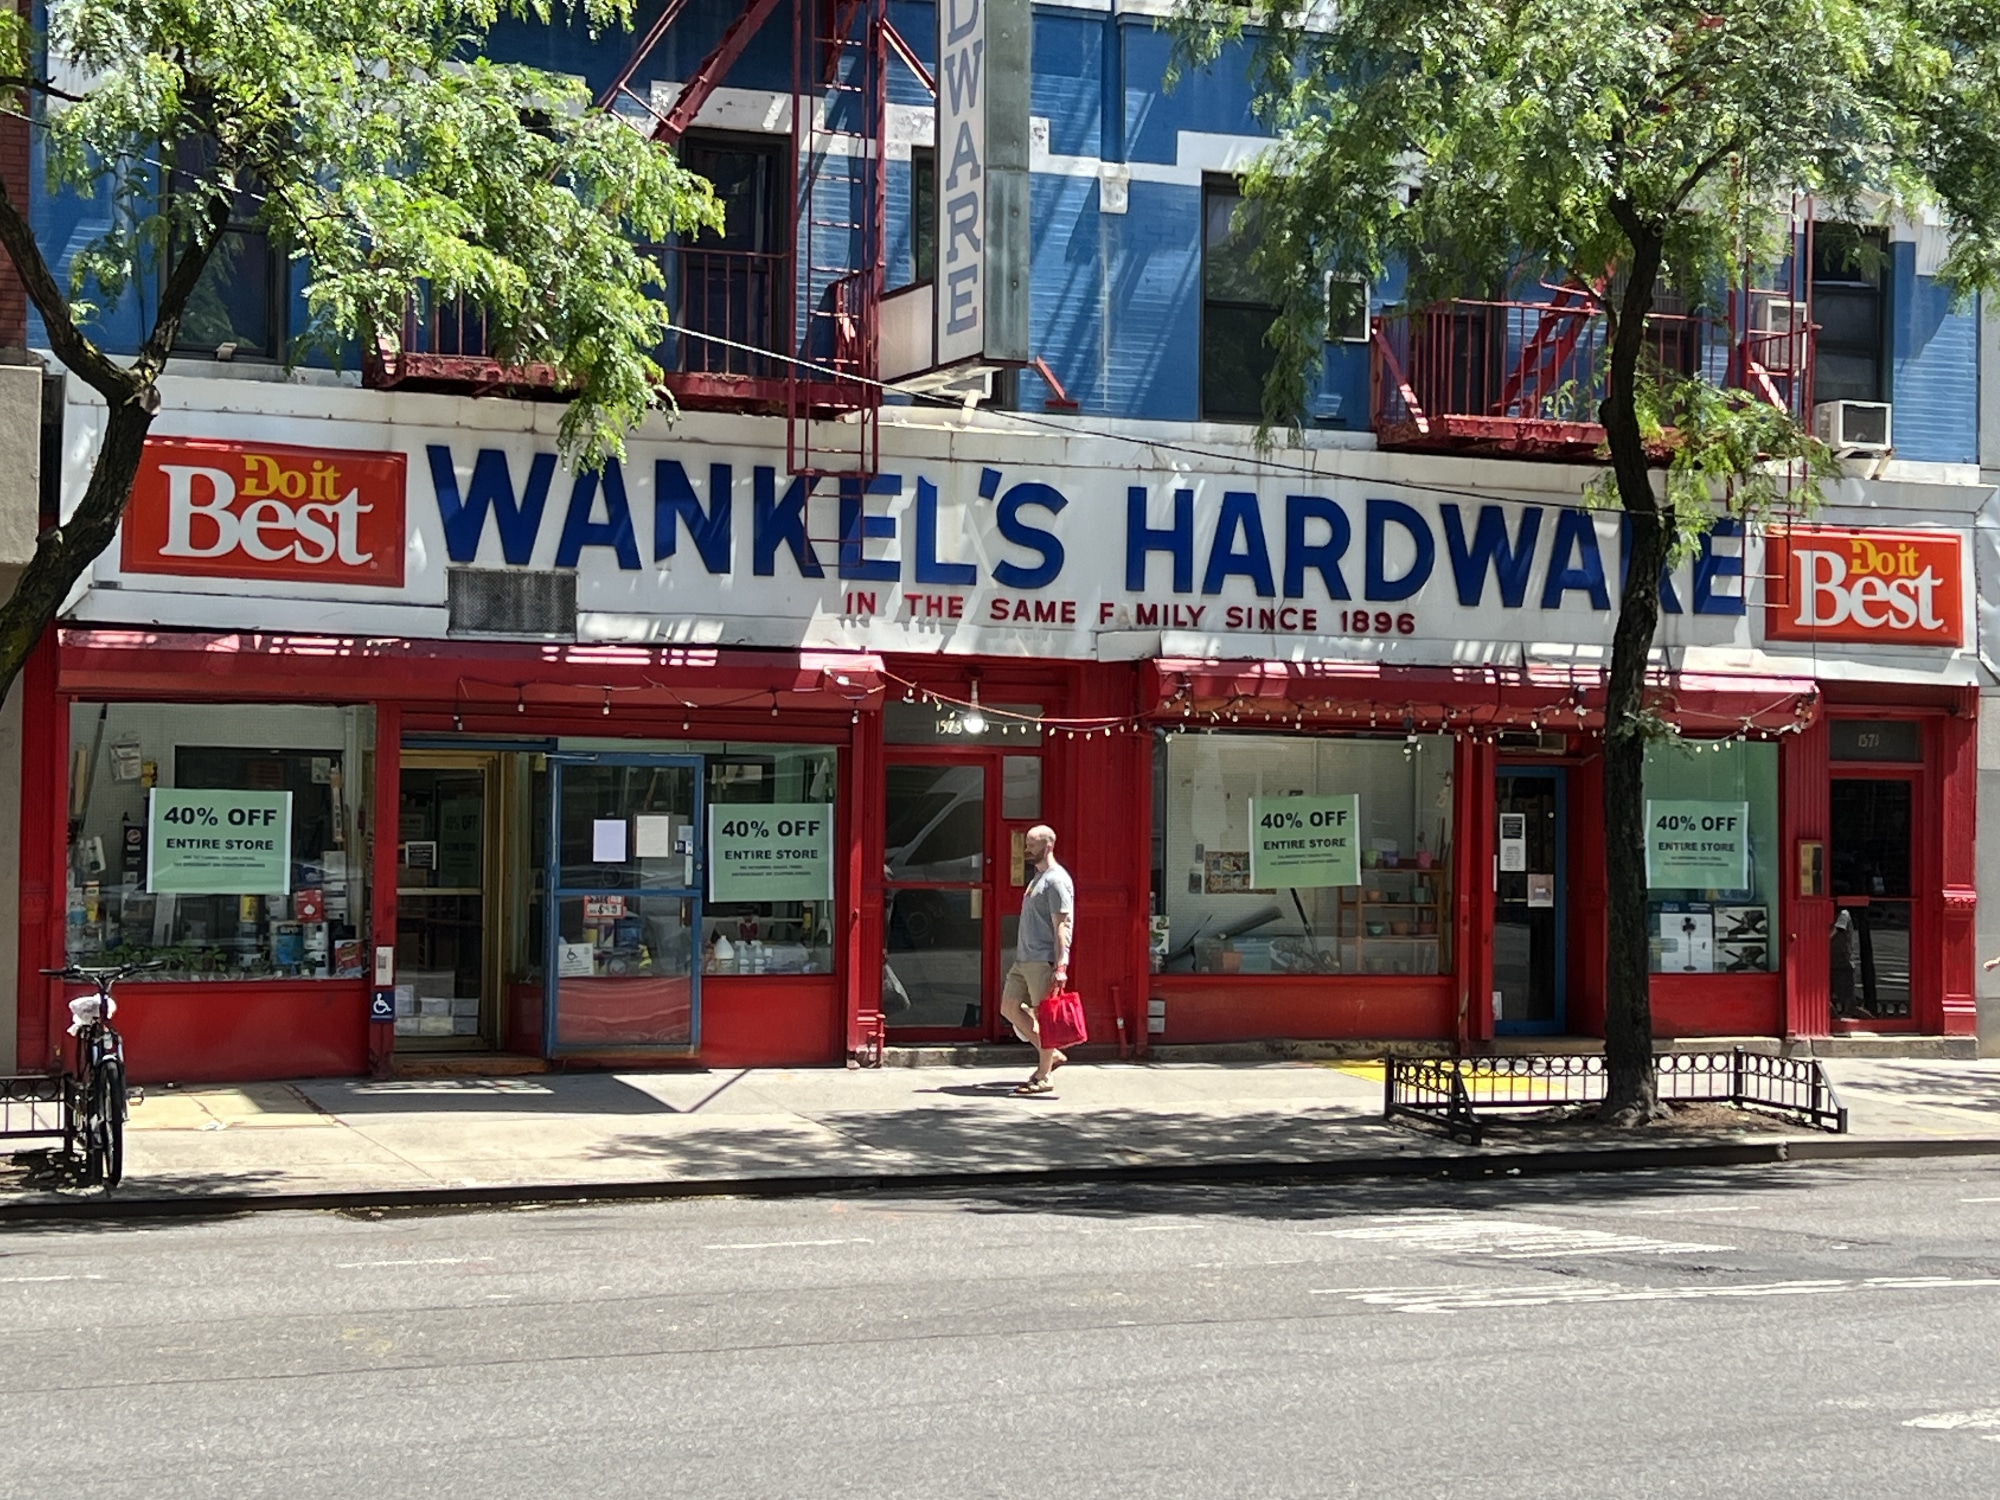 Wankel's Hardware closing after 125 years on the Upper East Side | Upper East Site